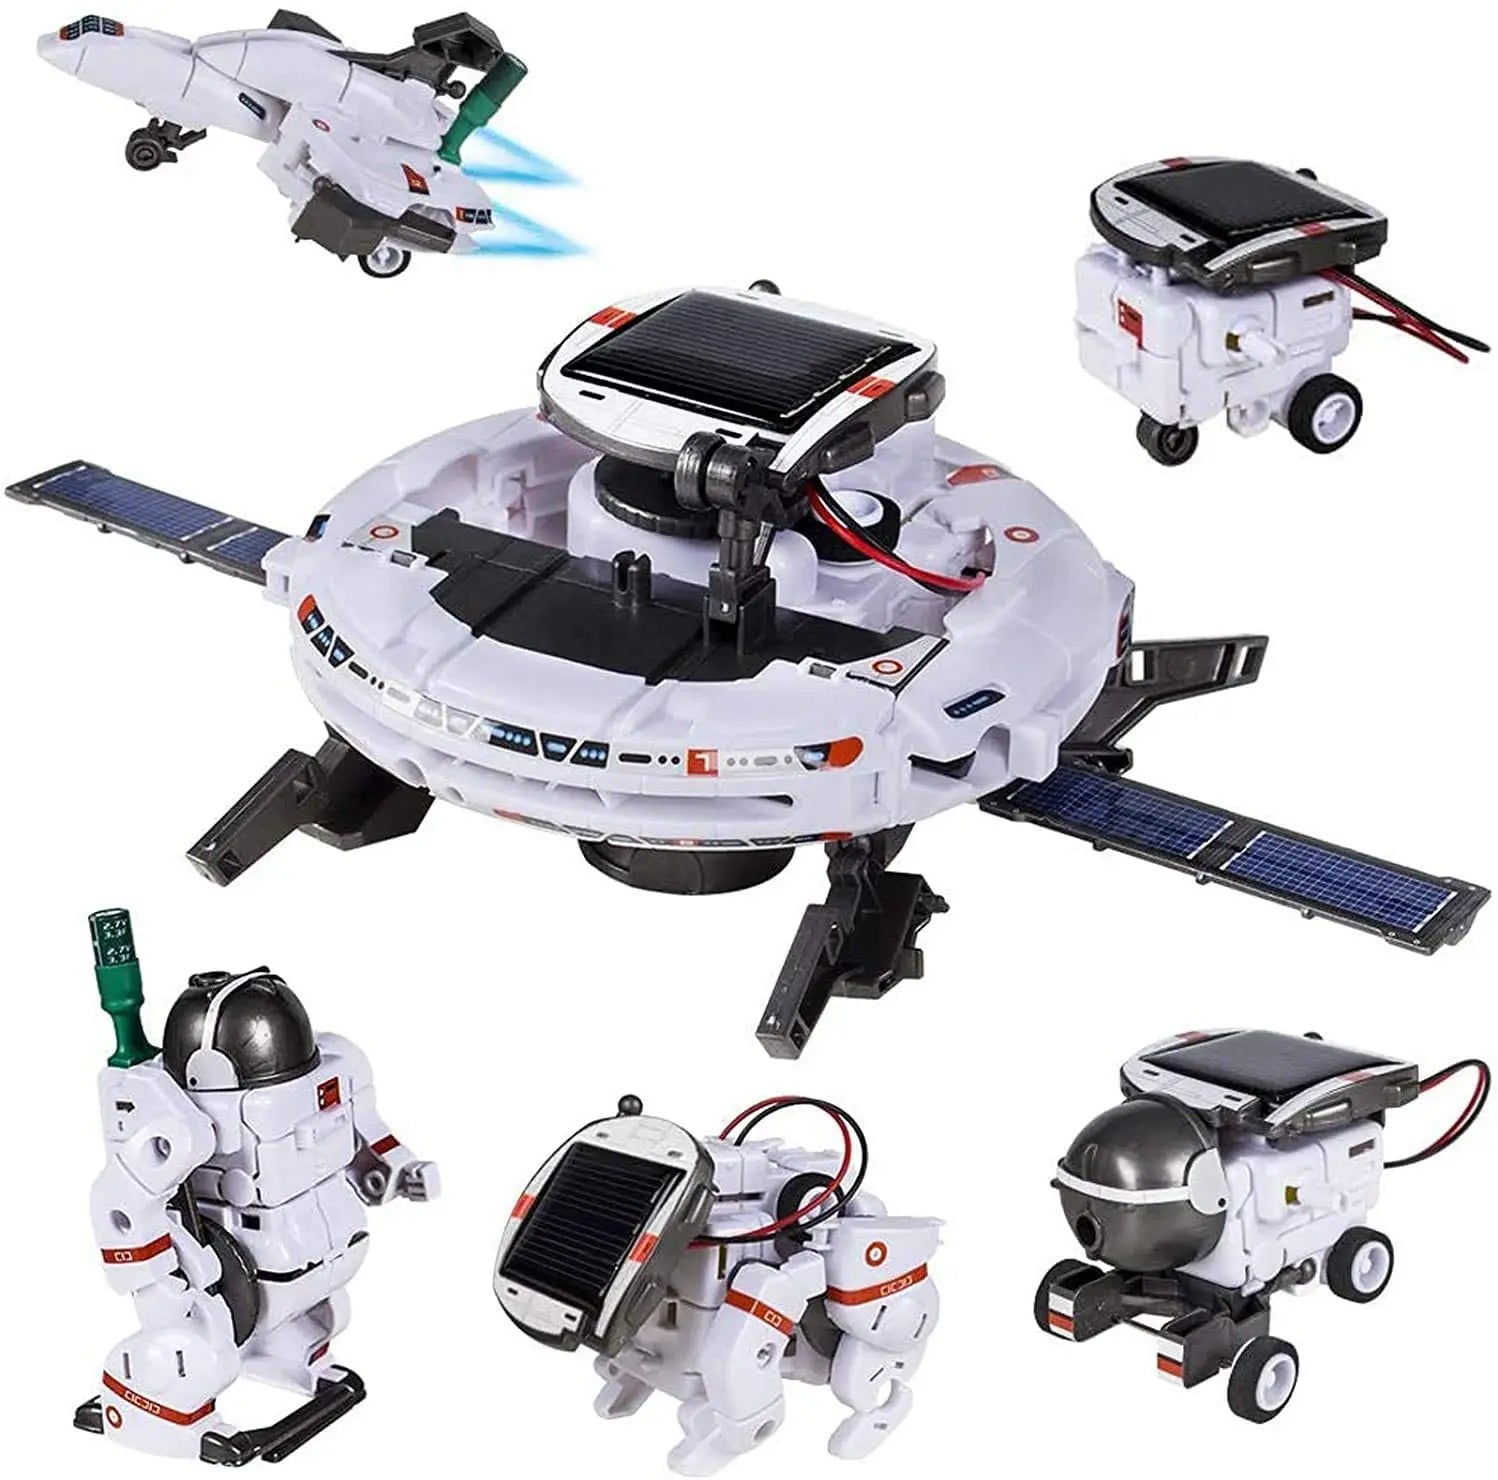 Solar-Powered 6-in-1 Science Experiment Robot Toy Kit for DIY Learning - ToylandEU